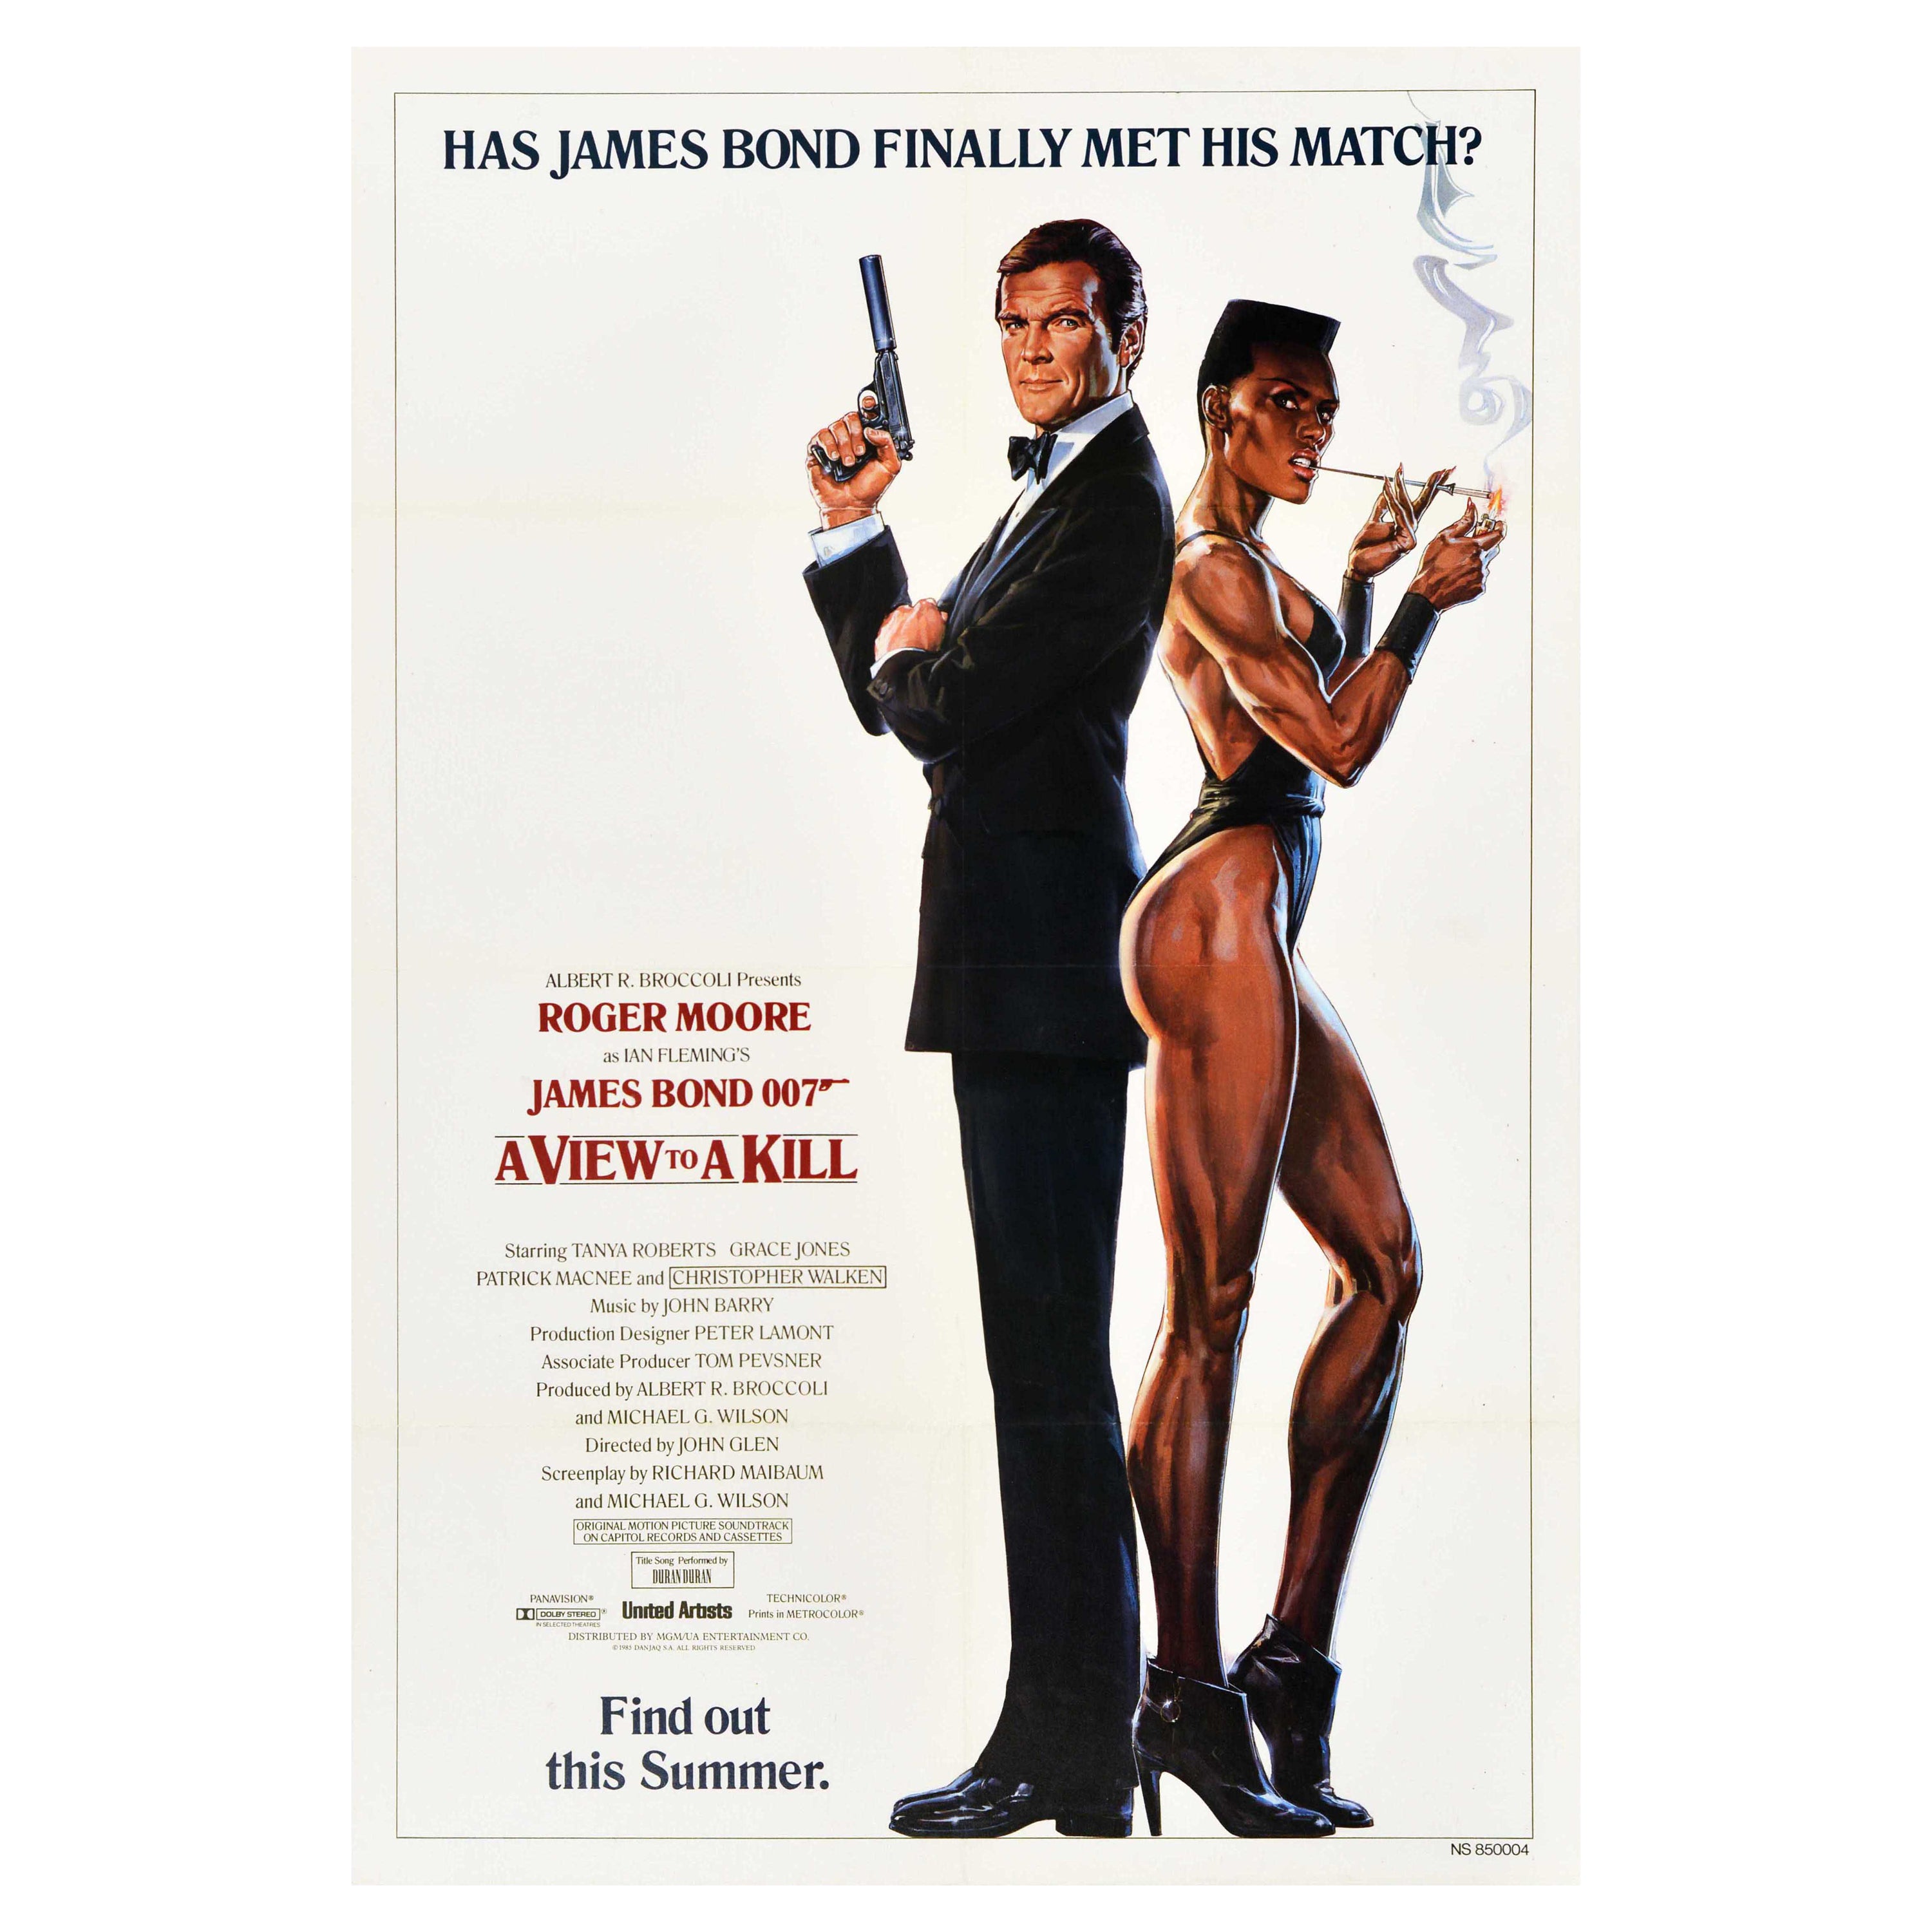 Original Vintage Film Poster James Bond A View To A Kill 007 Roger Moore Goozee